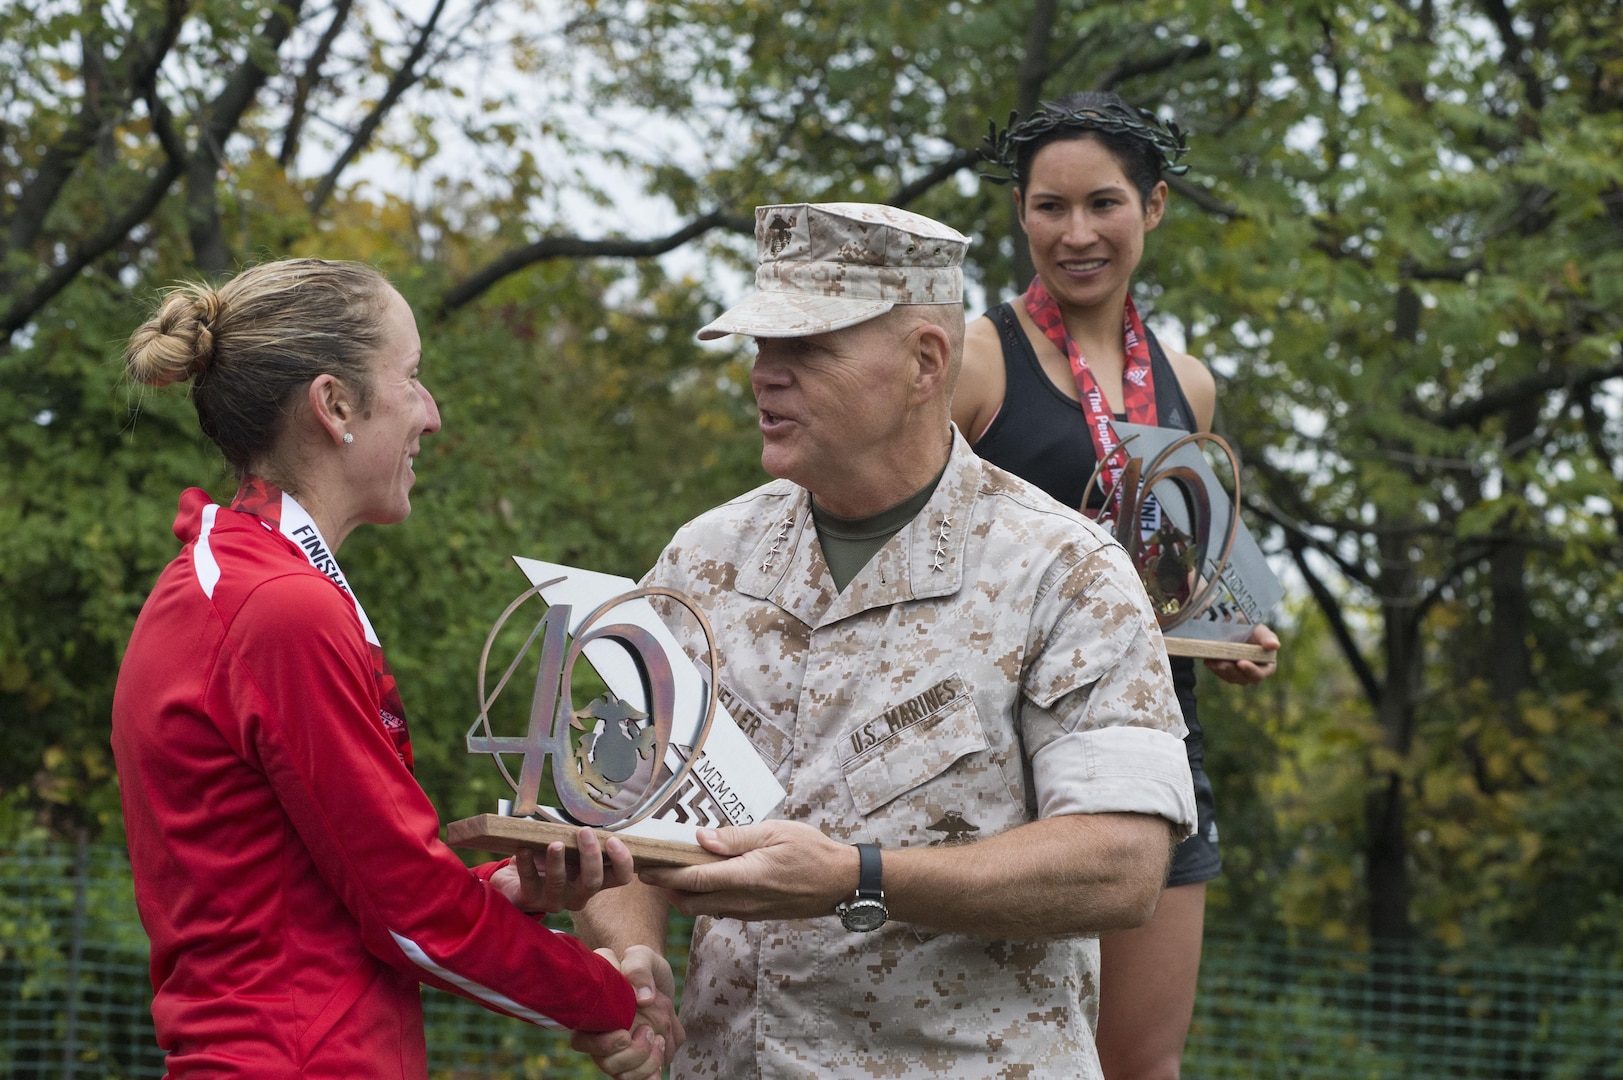 U.S. Marine Corps Capt. Christine Taranto of Monterey, Calif., receives a trophy from the 37th Commandant of the Marine Corps, General Robert B. Neller, for 2nd place female finisher of the 40th Marine Corps Marathon at the awards ceremony in Arlington, Va., Oct. 25, 2015. Also known as "The People's Marathon," the 26.2 mile race drew roughly 30,000 participants to promote physical fitness, generate goodwill in the community, and showcase the organizational skills of the Marine Corps. (U.S. Marine Corps photo by Staff Sgt. Sarah R. Hickory/Released)